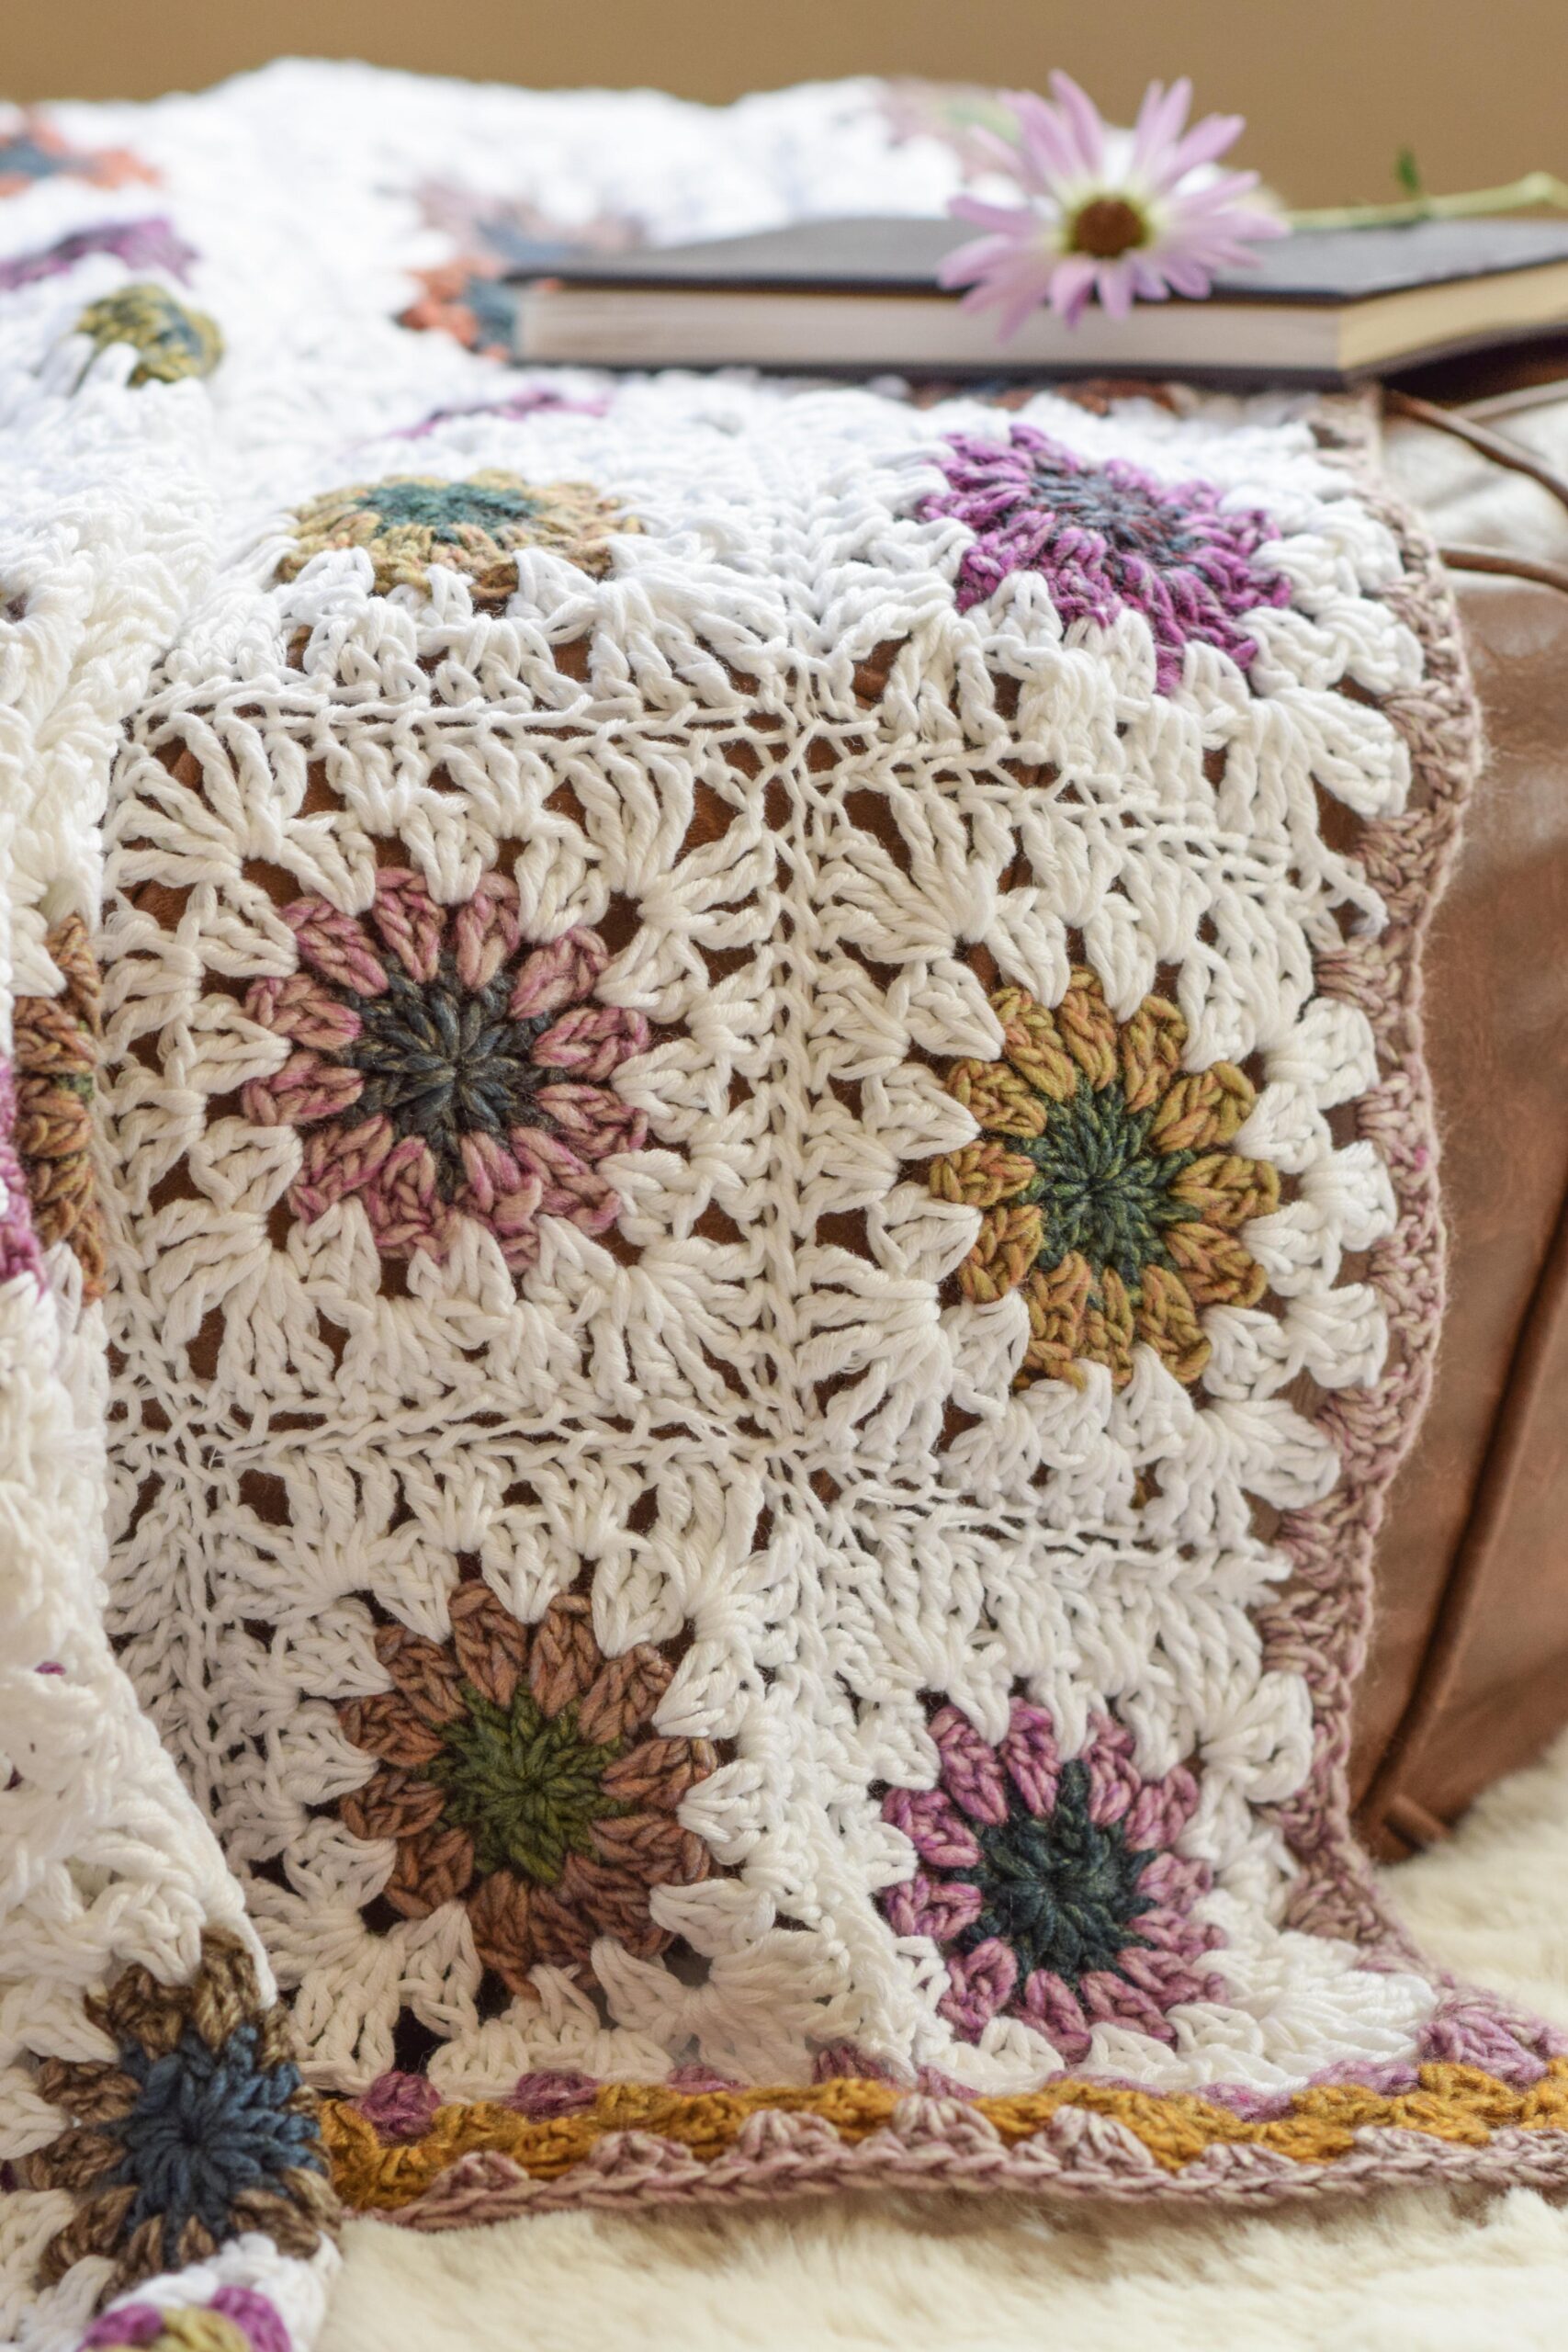 Bloom Anyway Granny Square Blanket - Crochet 365 Knit Too